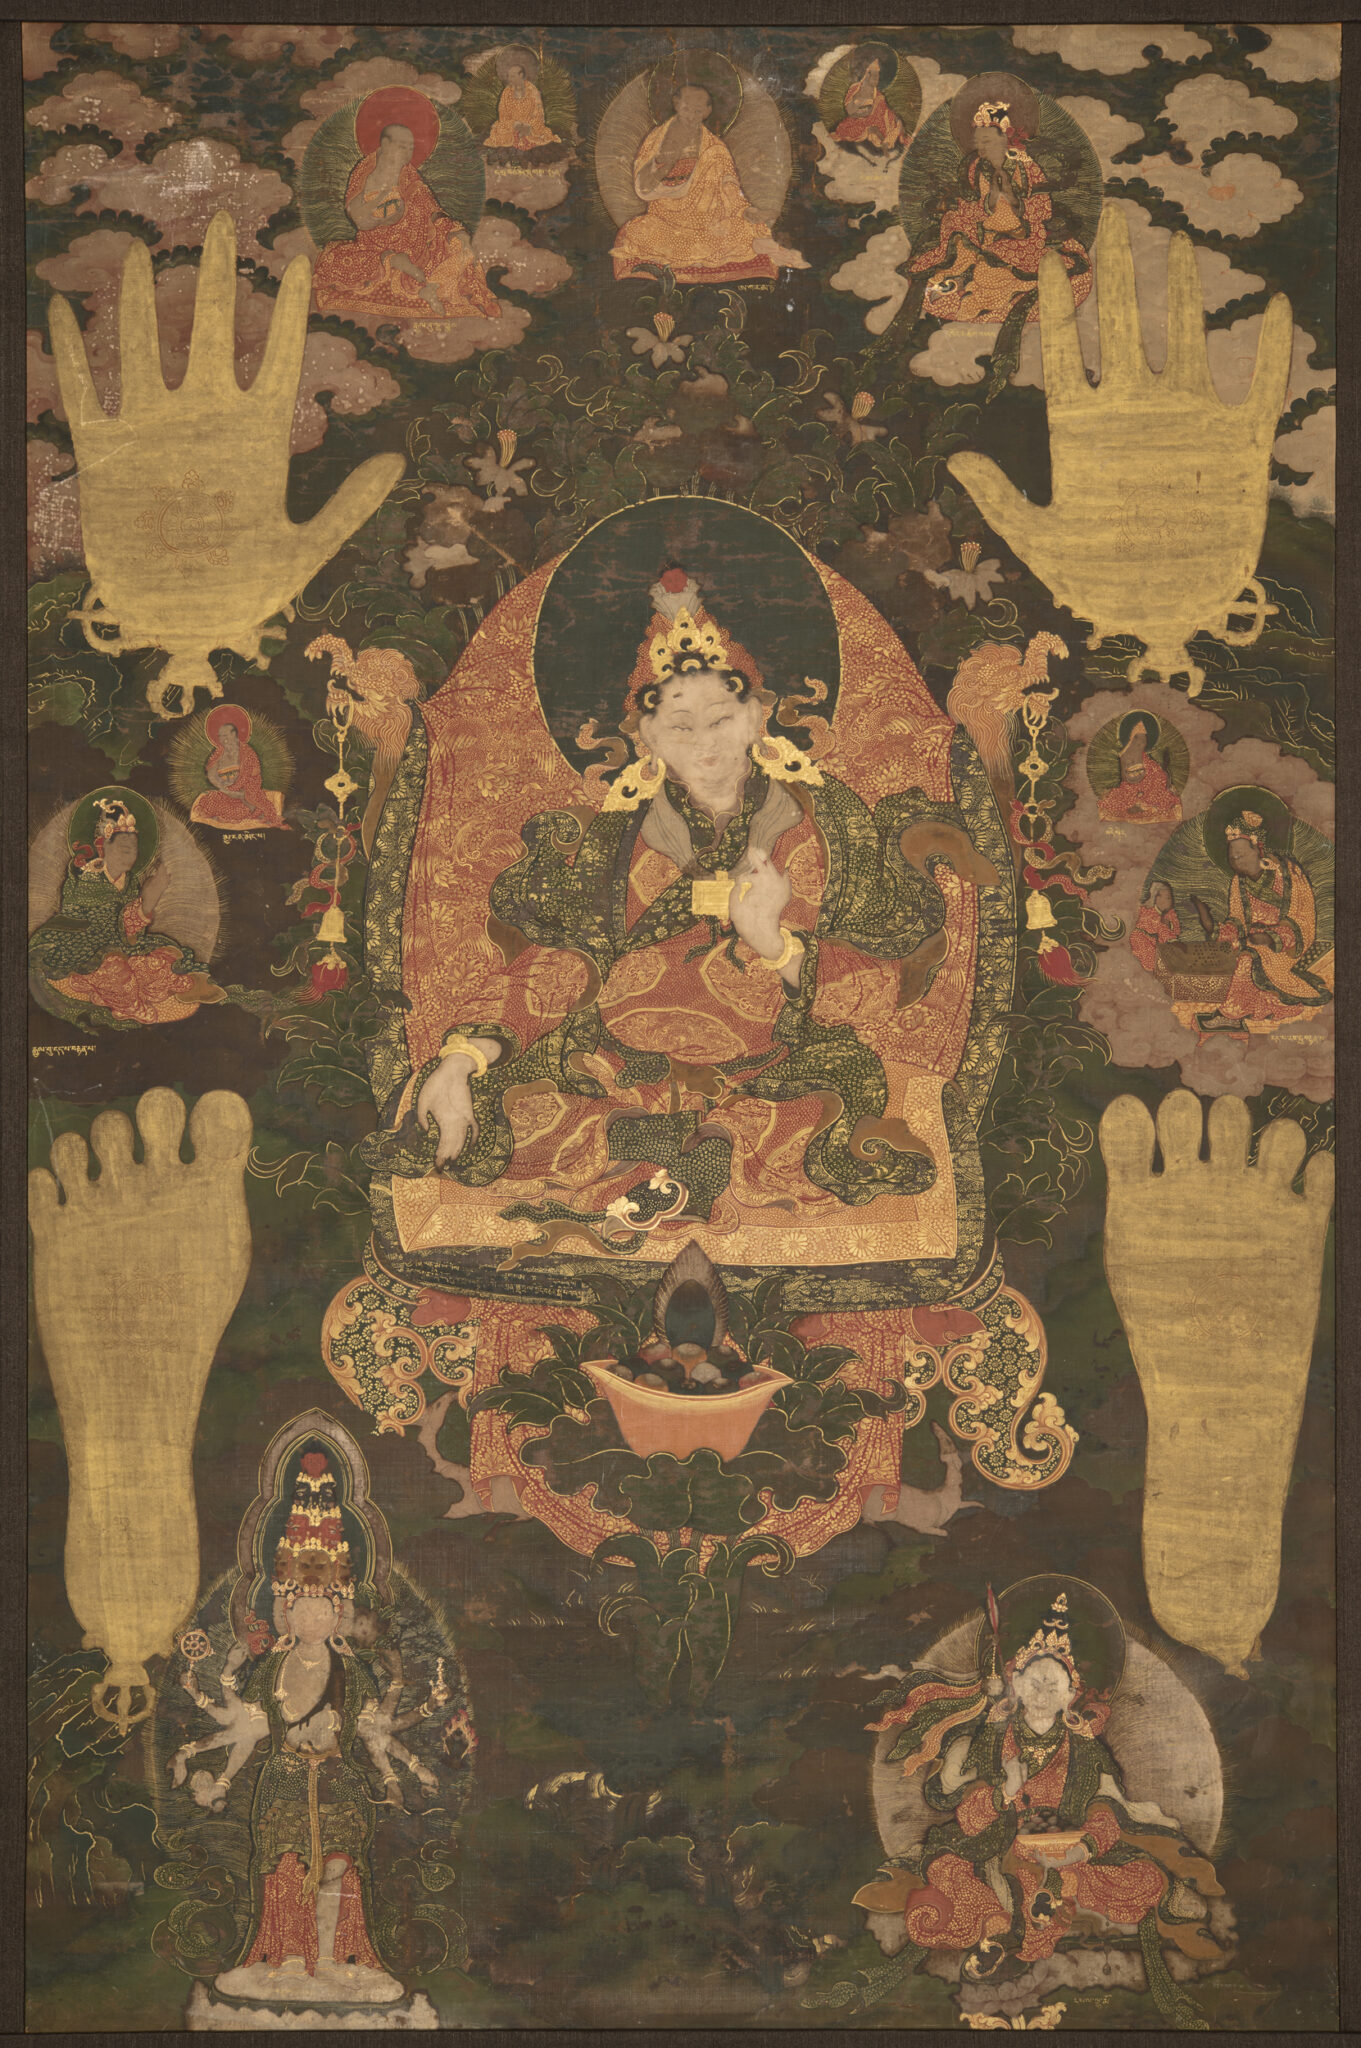 Pair of hand- and footprints frame holy man seated against background featuring deity portraits and vegetation